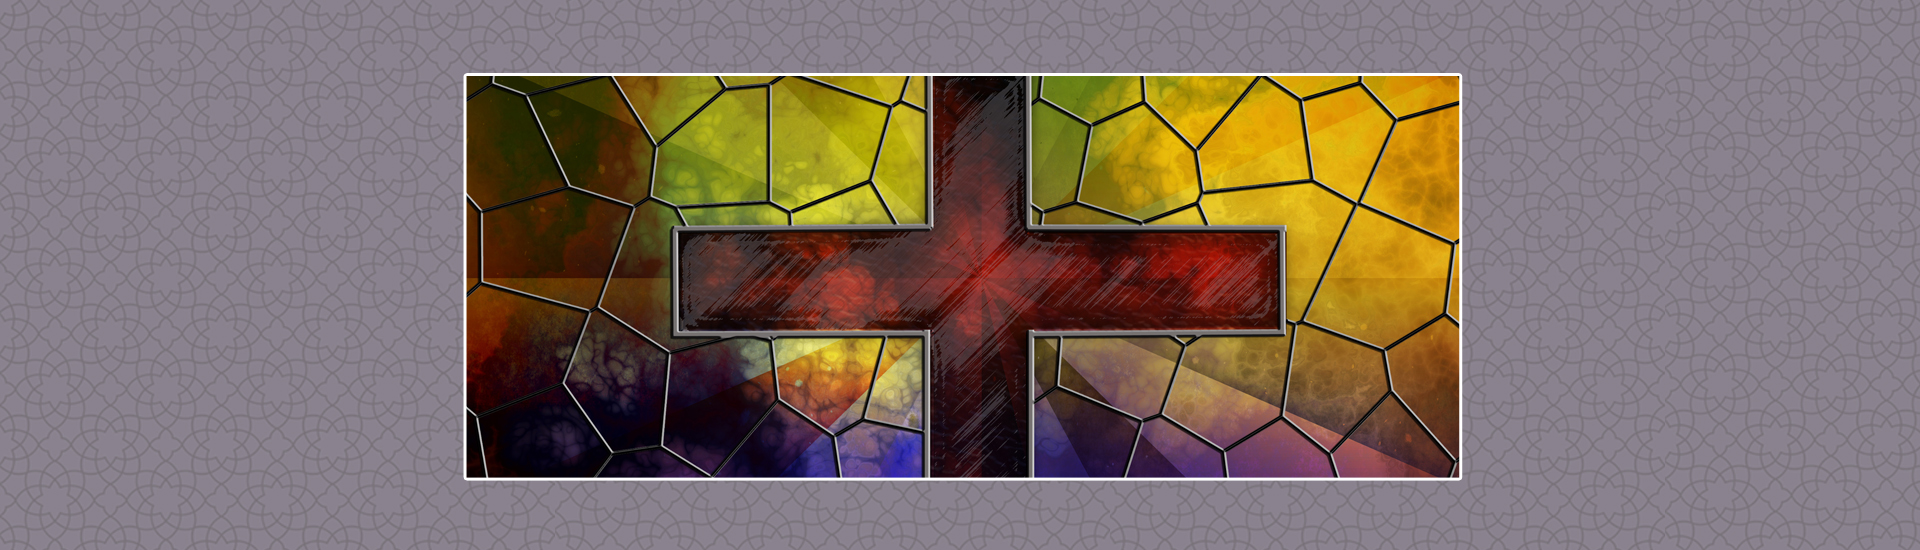 Red Glass Cross on Stained Glass Window Panel